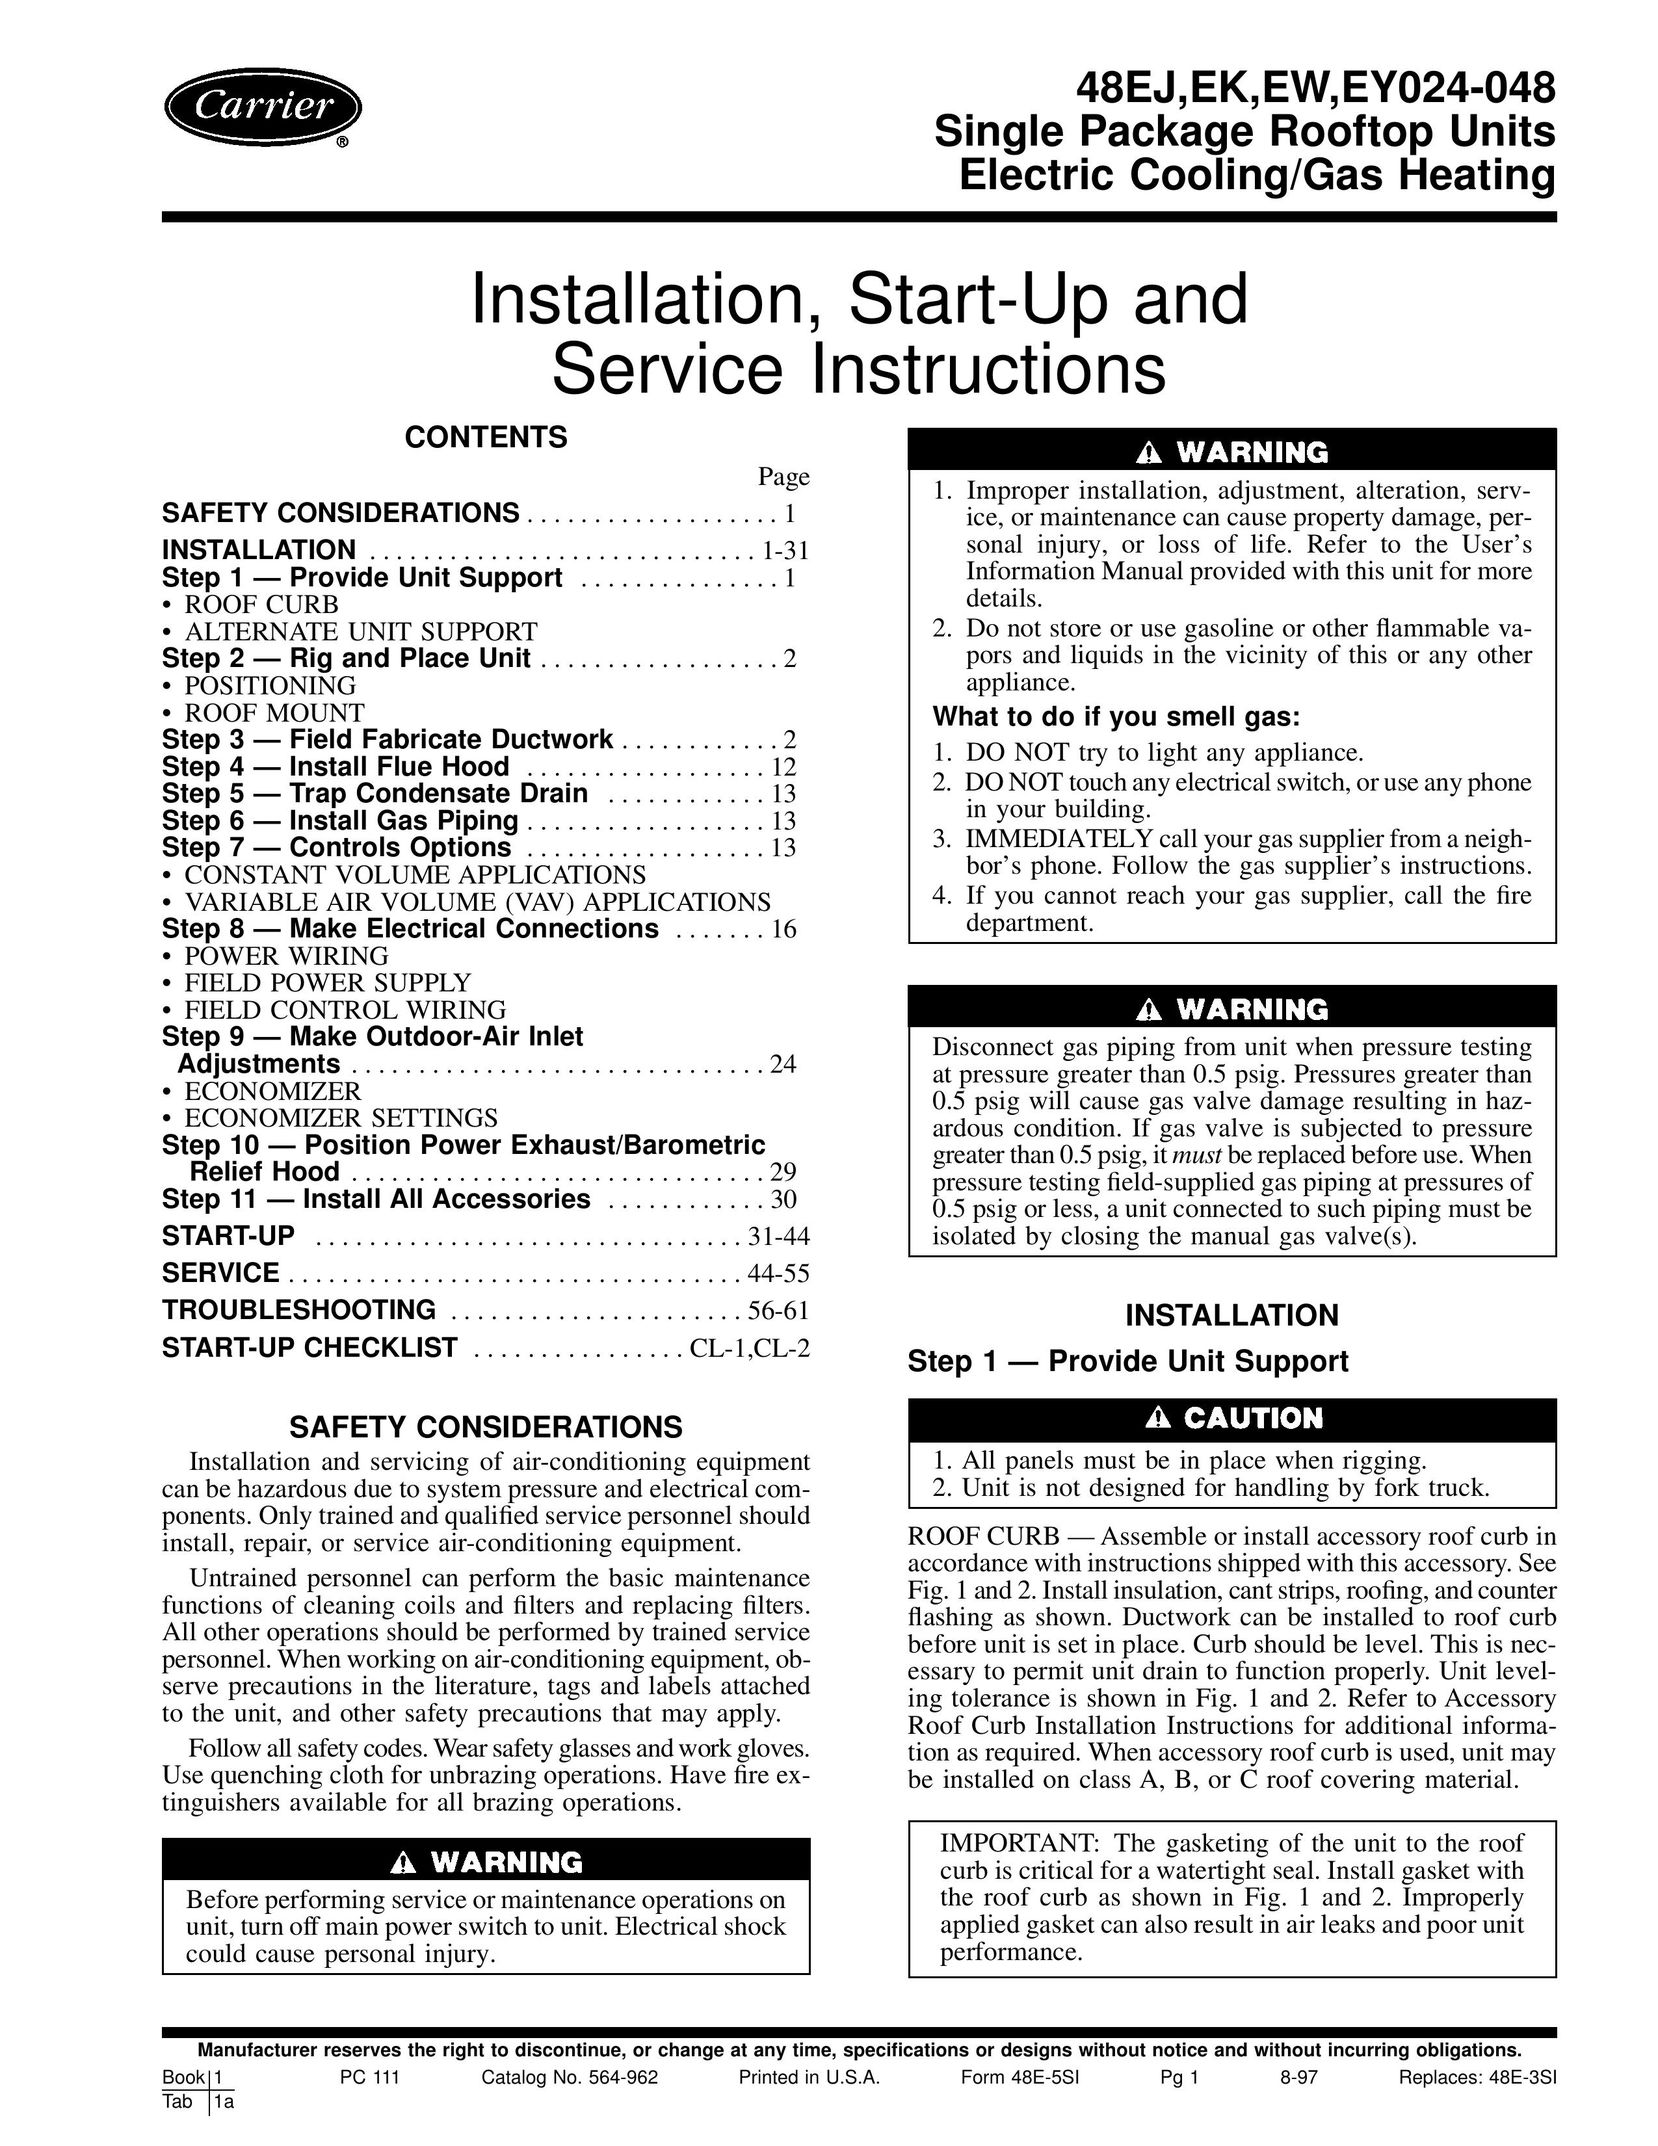 Carrier EY024-048 Gas Heater User Manual